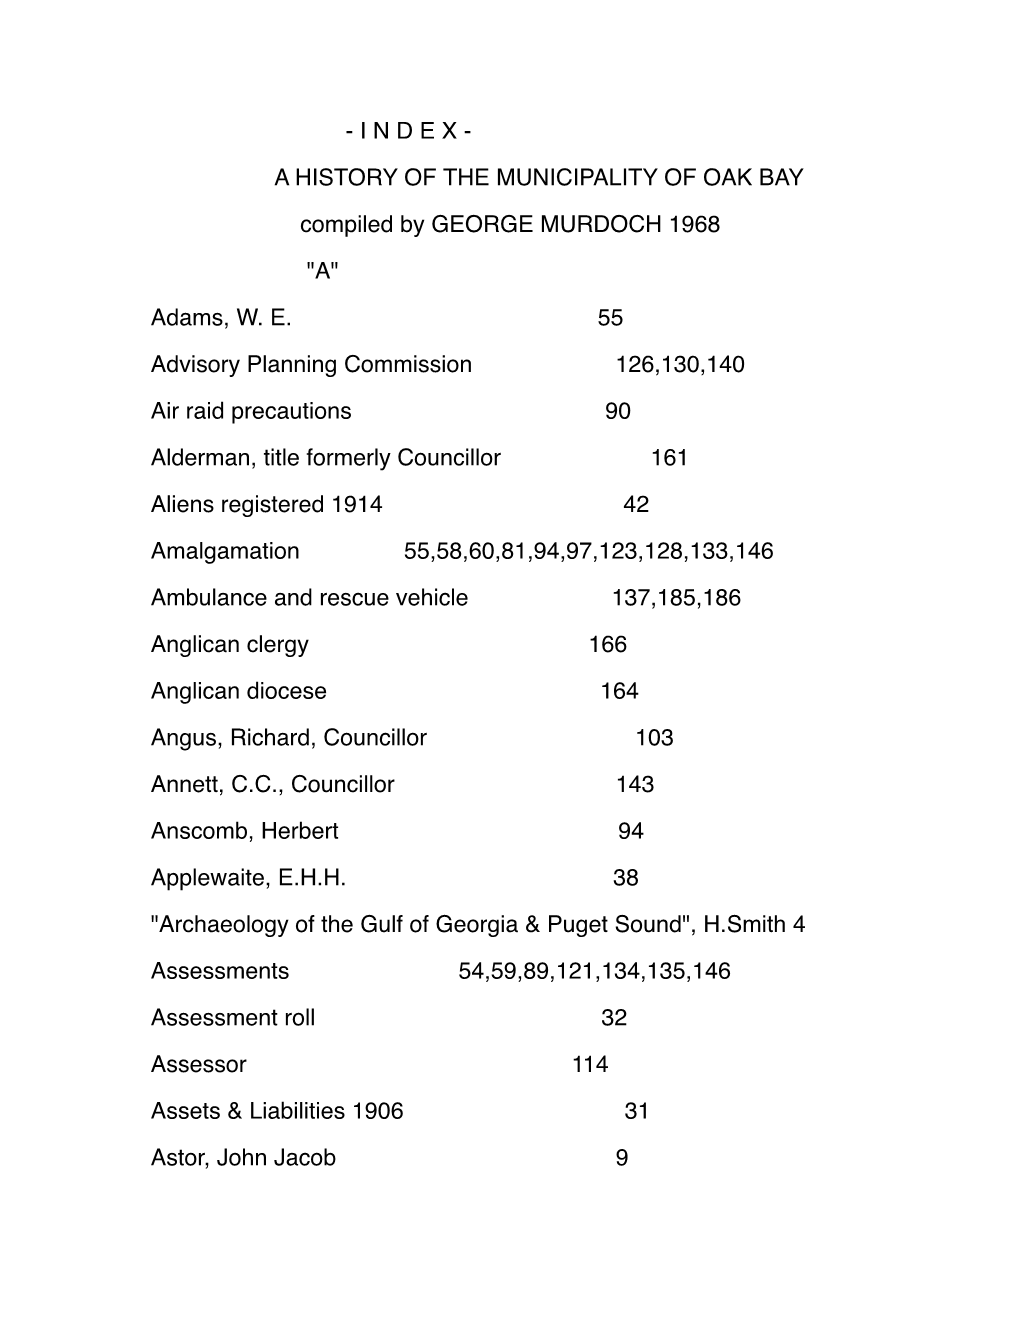 I N D E X - a HISTORY of the MUNICIPALITY of OAK BAY Compiled by GEORGE MURDOCH 1968 "A" Adams, W